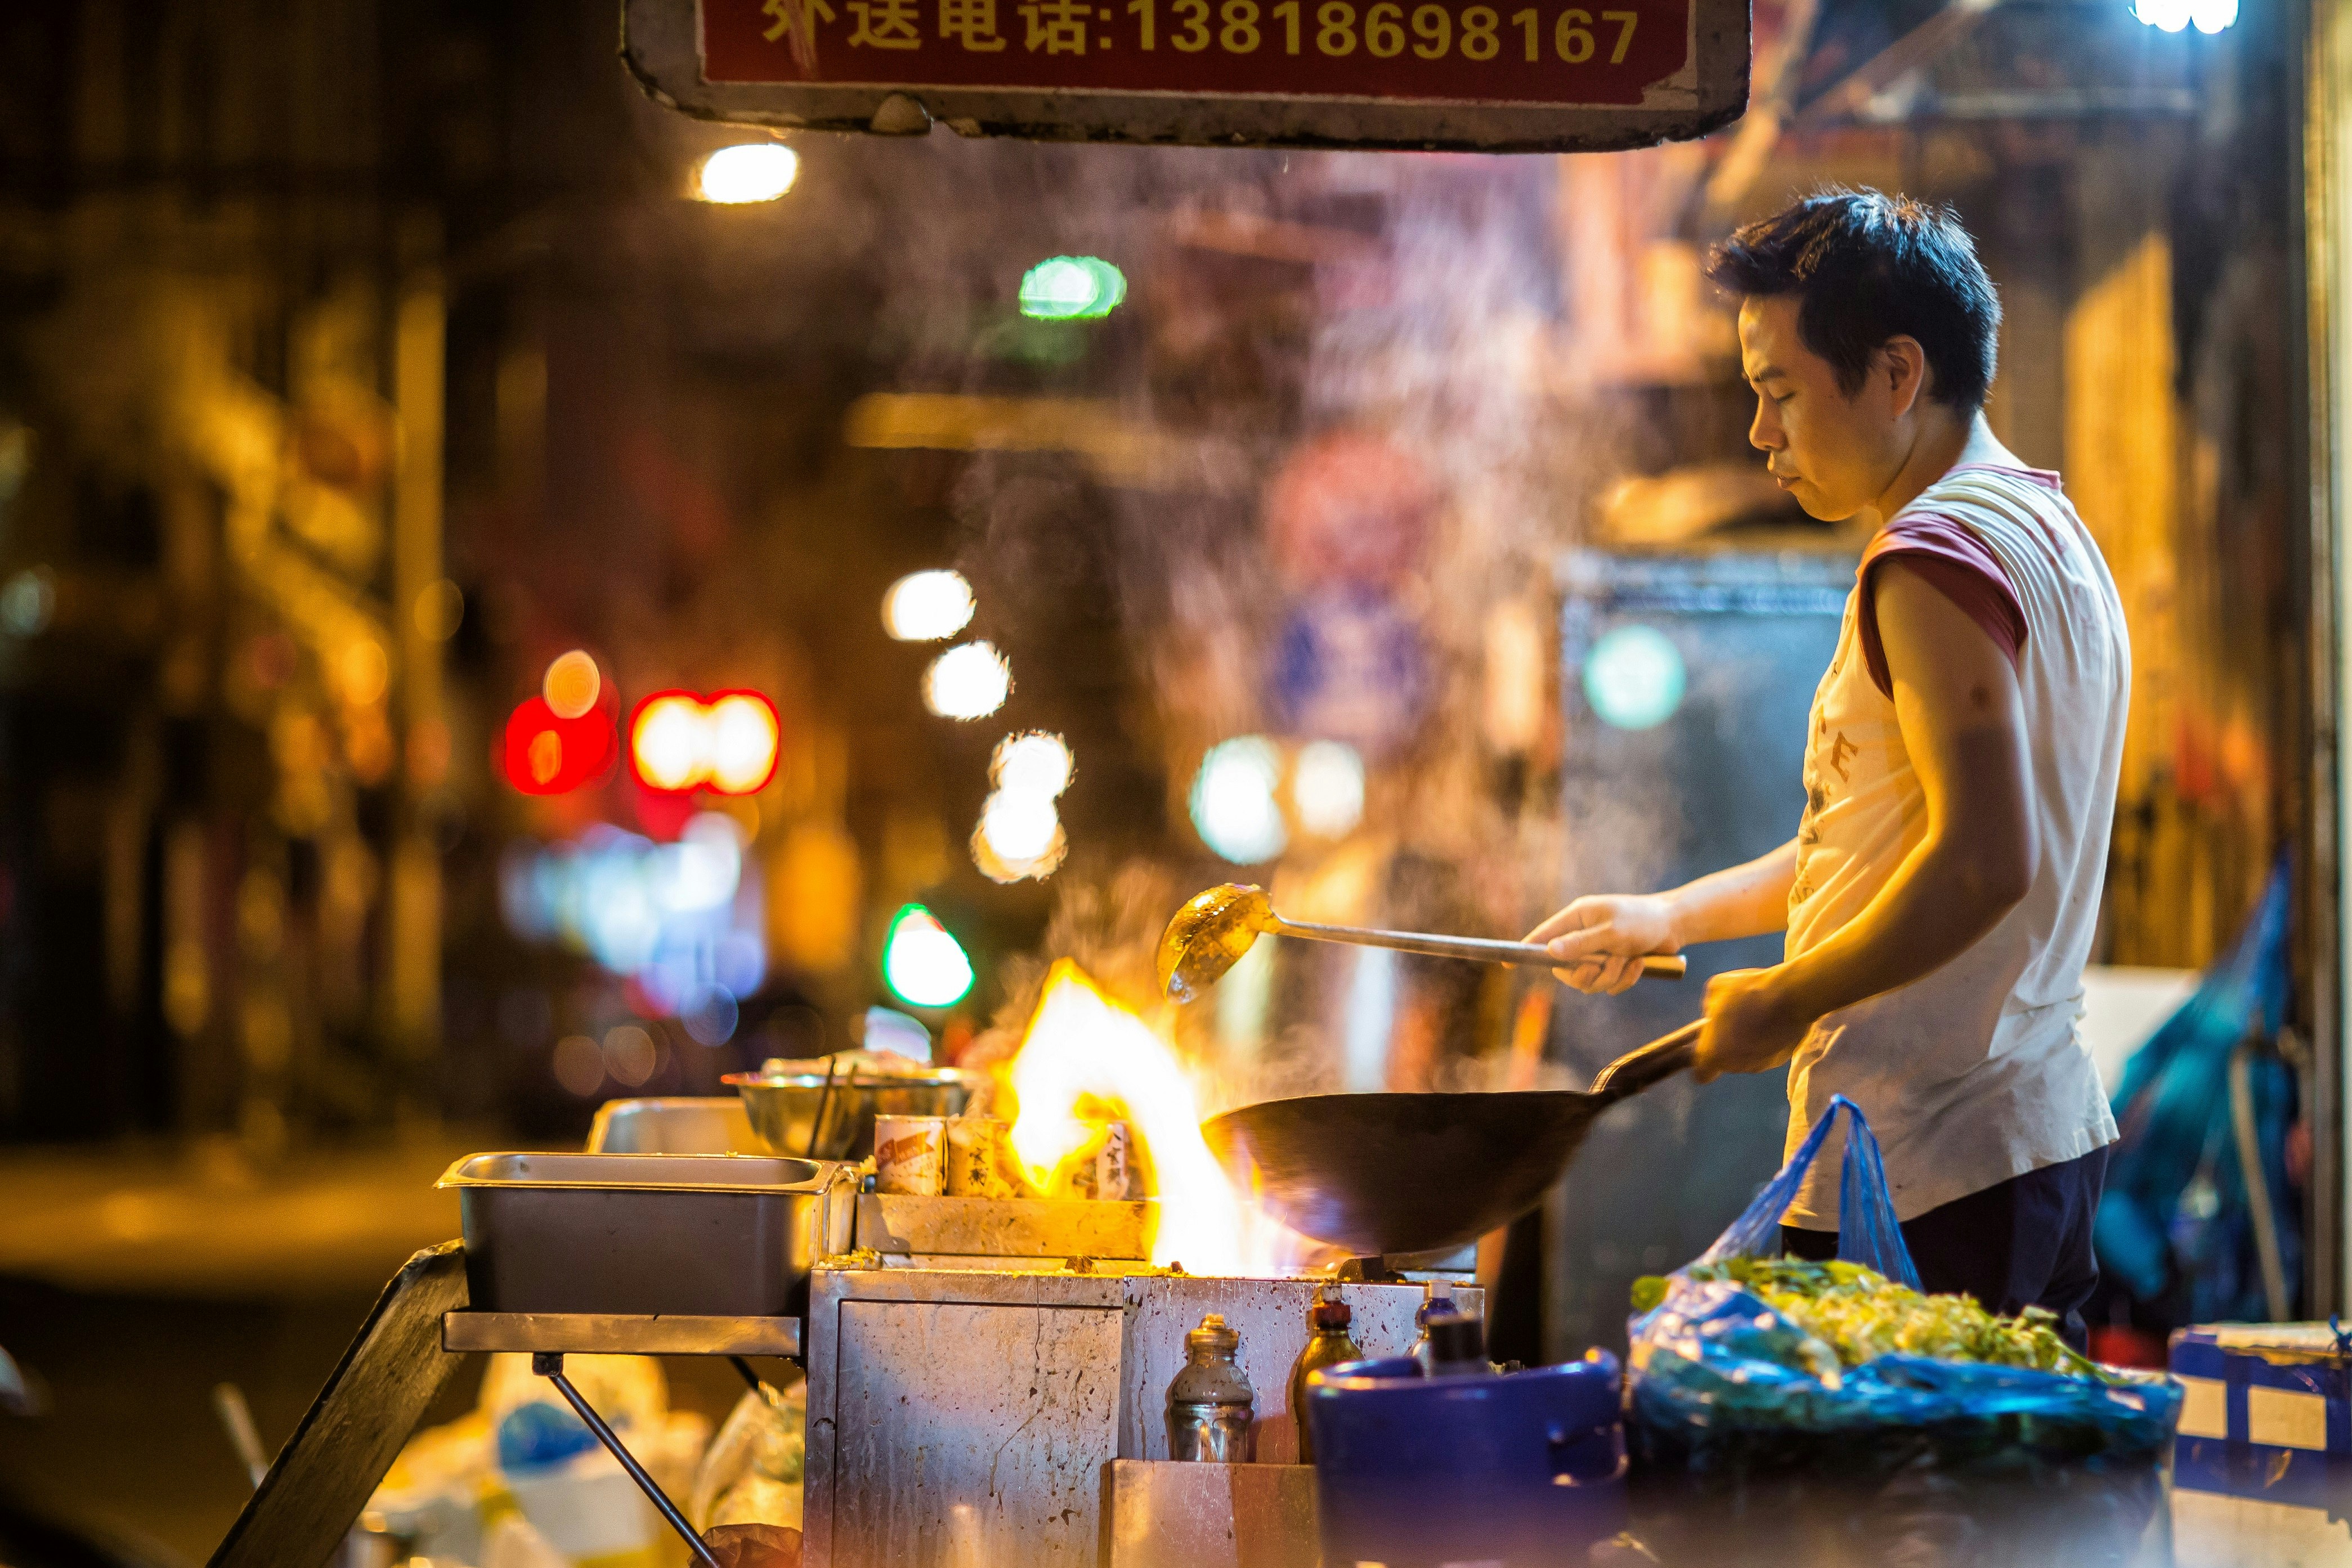 A vendor cooks food in a wok over an open flame on the darkened evening streets of Shanghai. The vendor is in sharp focus while the background is blurred.